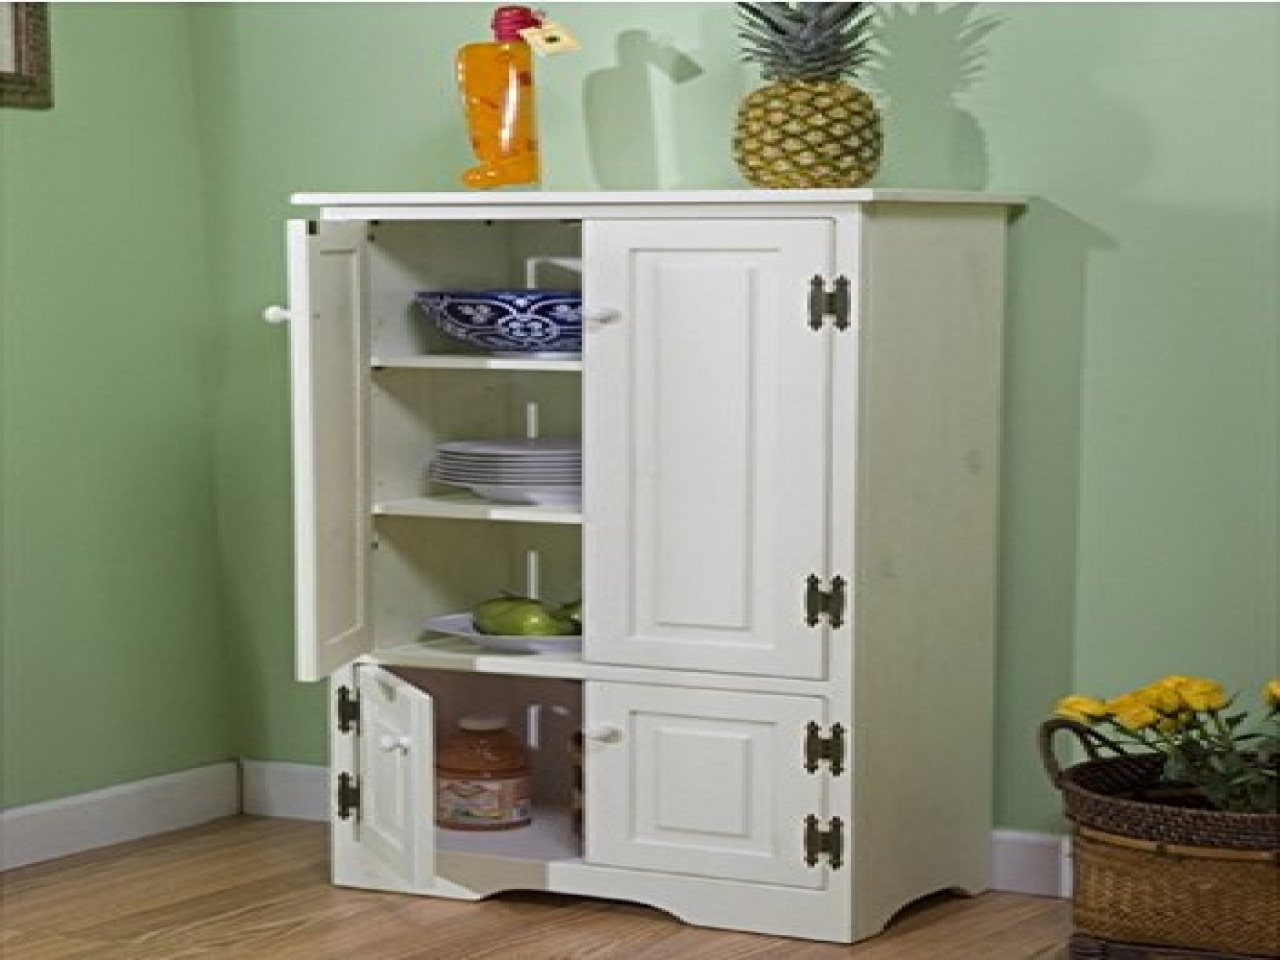 Home Depot Kitchen Organizers
 Where to laundry room cabinets home depot kitchen